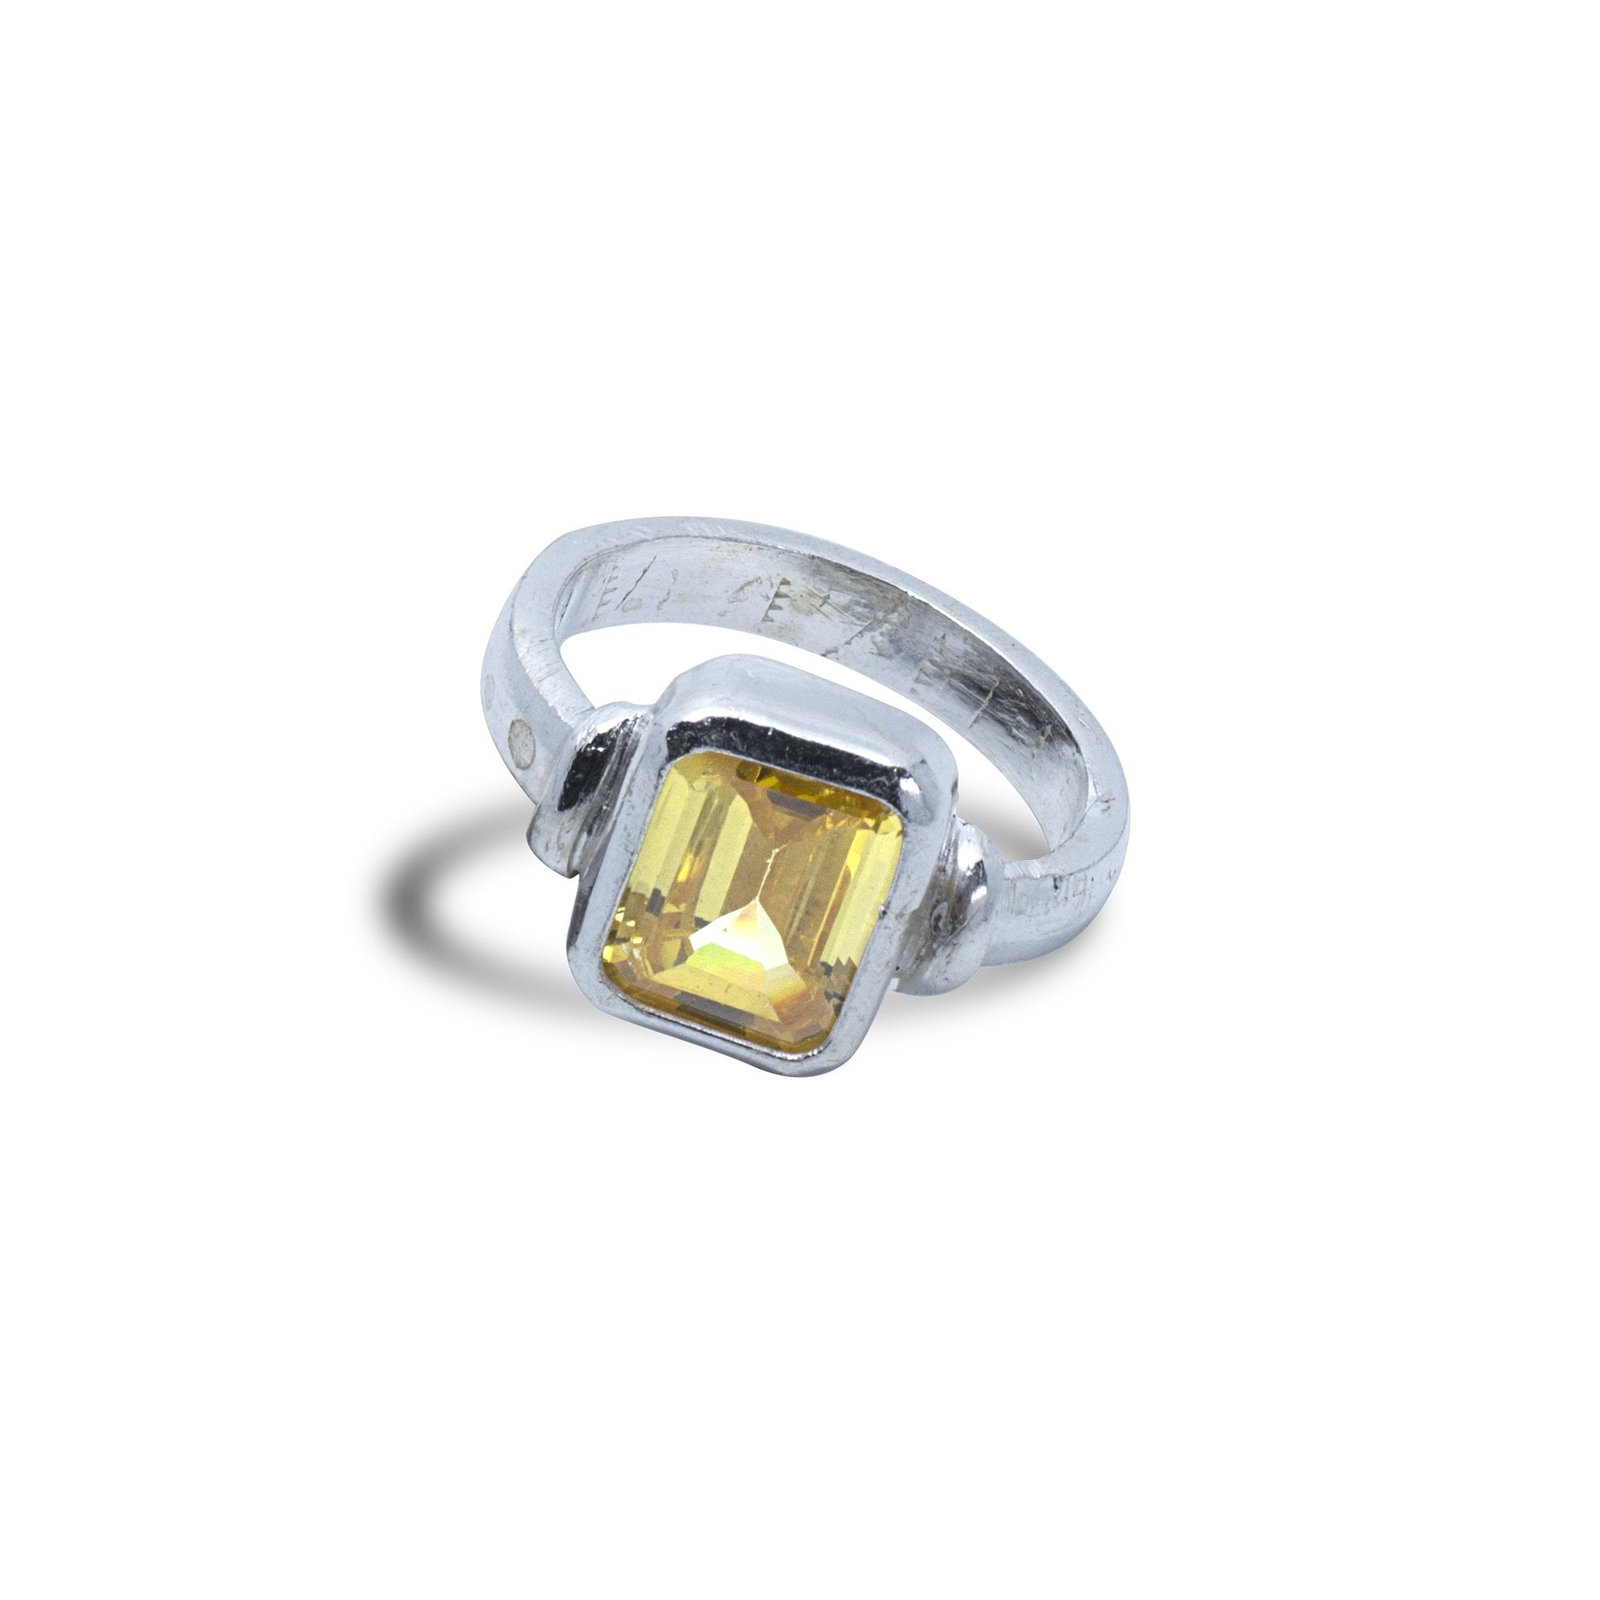 YELLOW STONE RING 6.00 CARAT Yellow Sapphire Stone RING GOLD Plated  Adjustable Ring Original and Certified